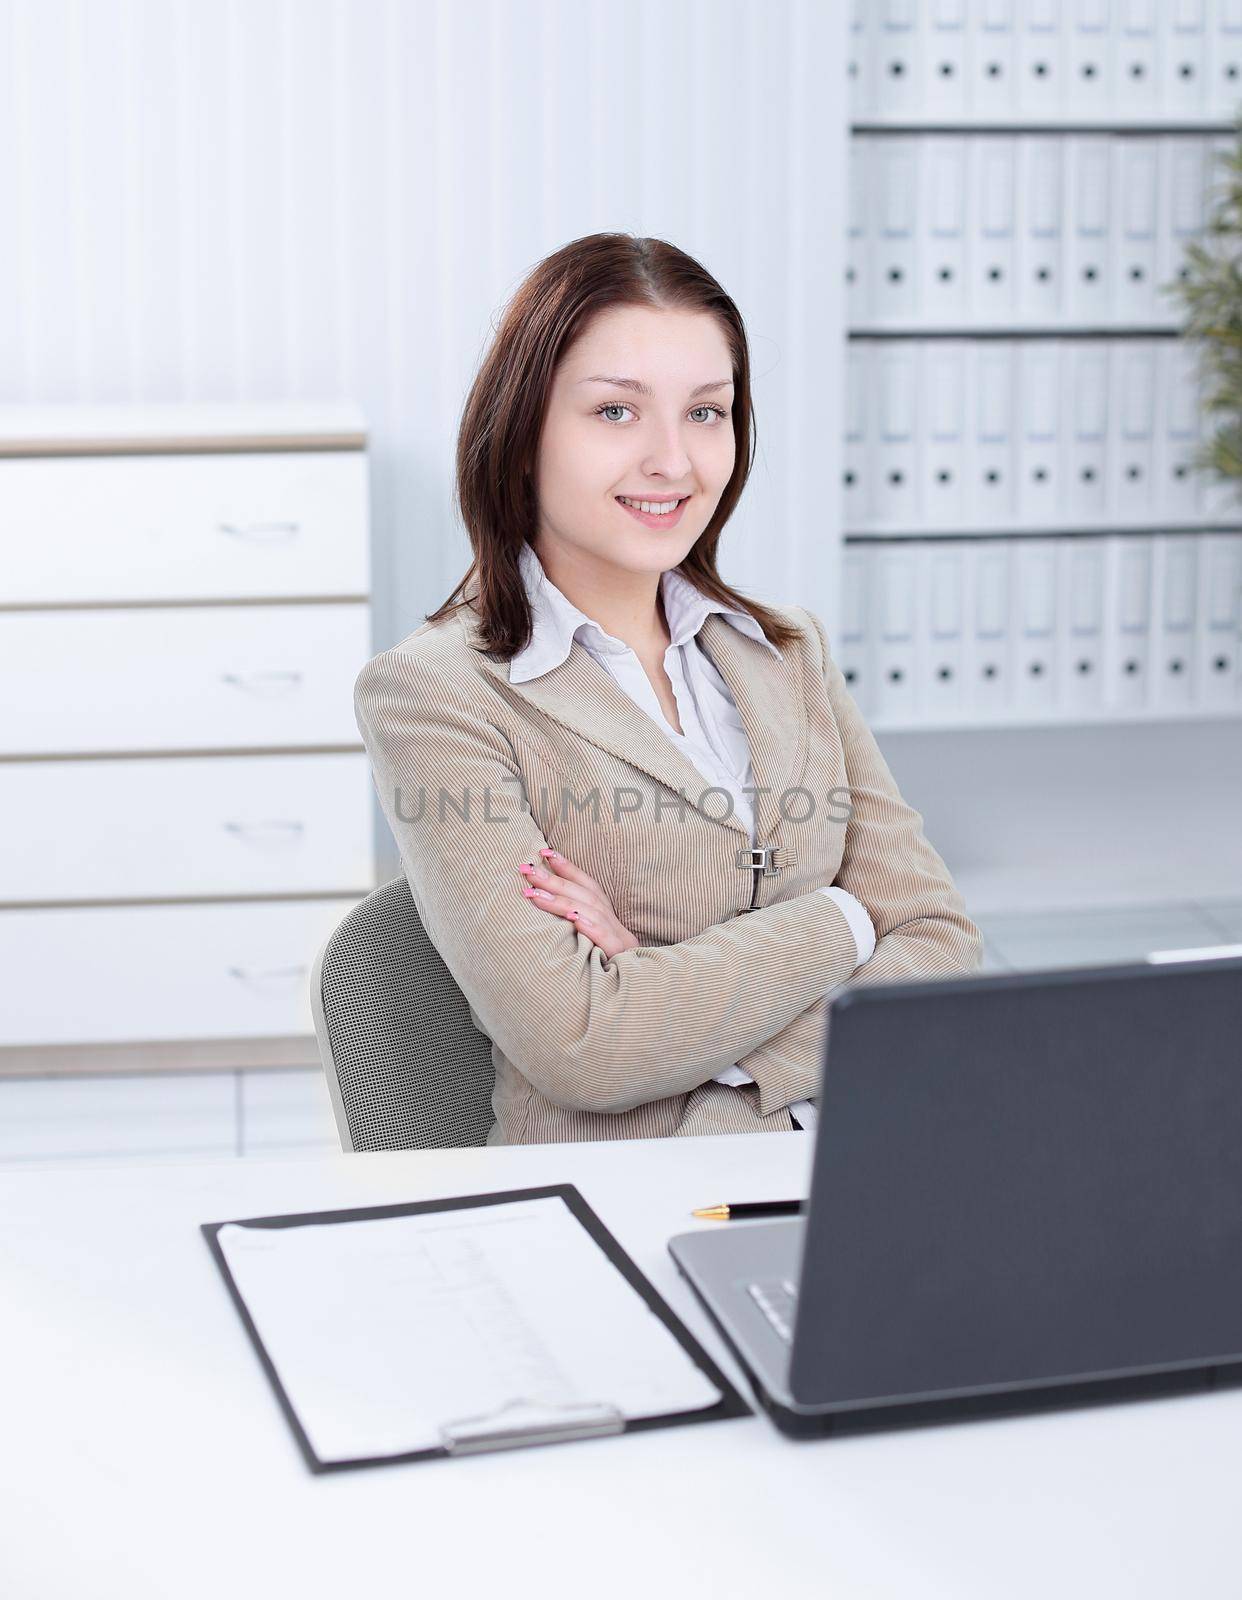 Executive business woman writing on a blak sheet.photo with copy space